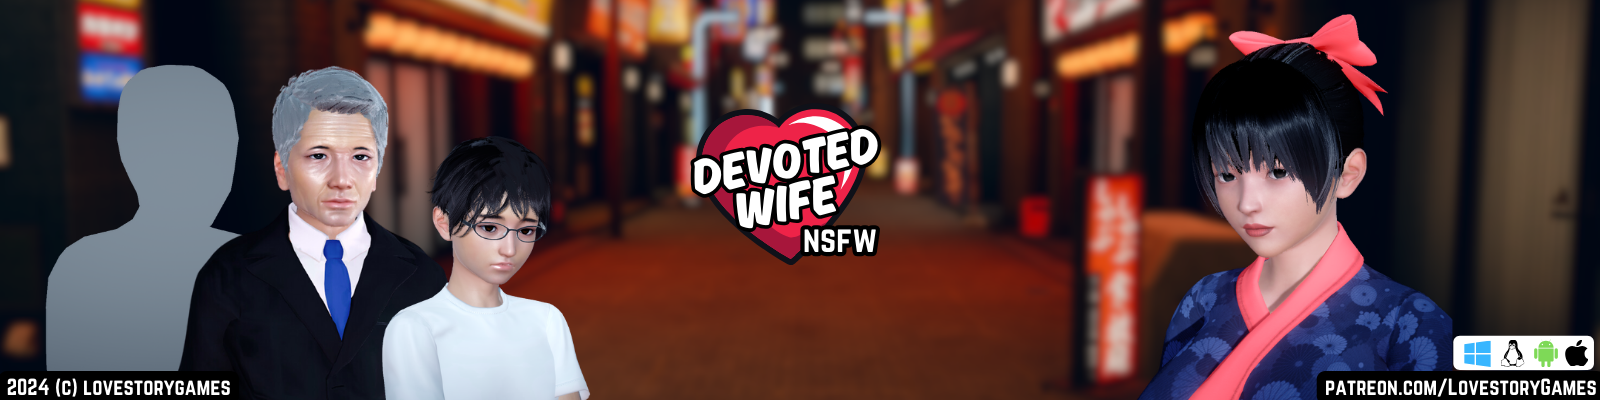 Devoted Wife 0.33